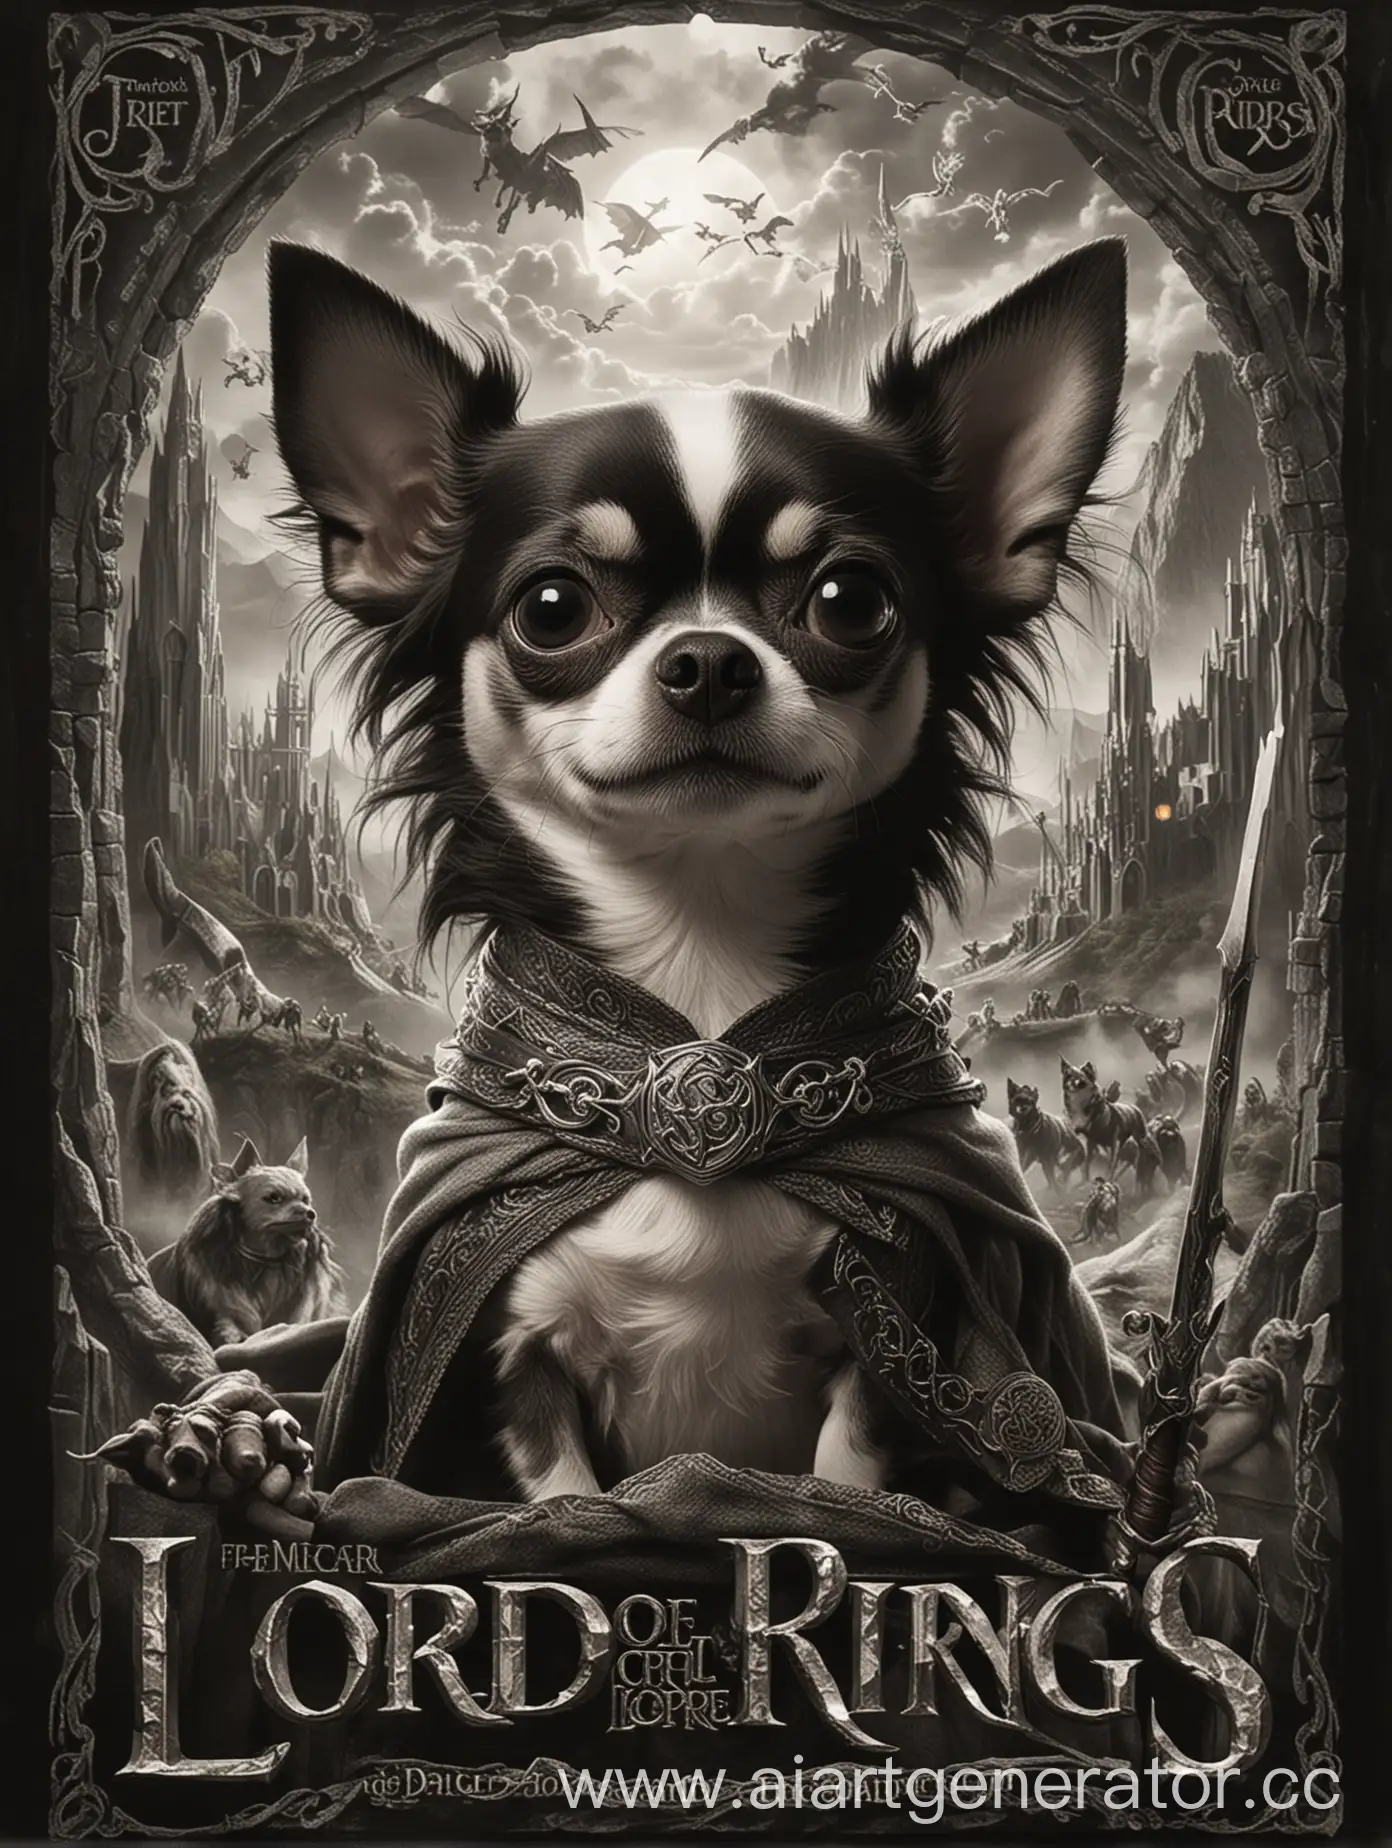 Styck-and-IQOS-Magical-Salvation-of-Middleearth-Featuring-a-BlackandWhite-Chihuahua